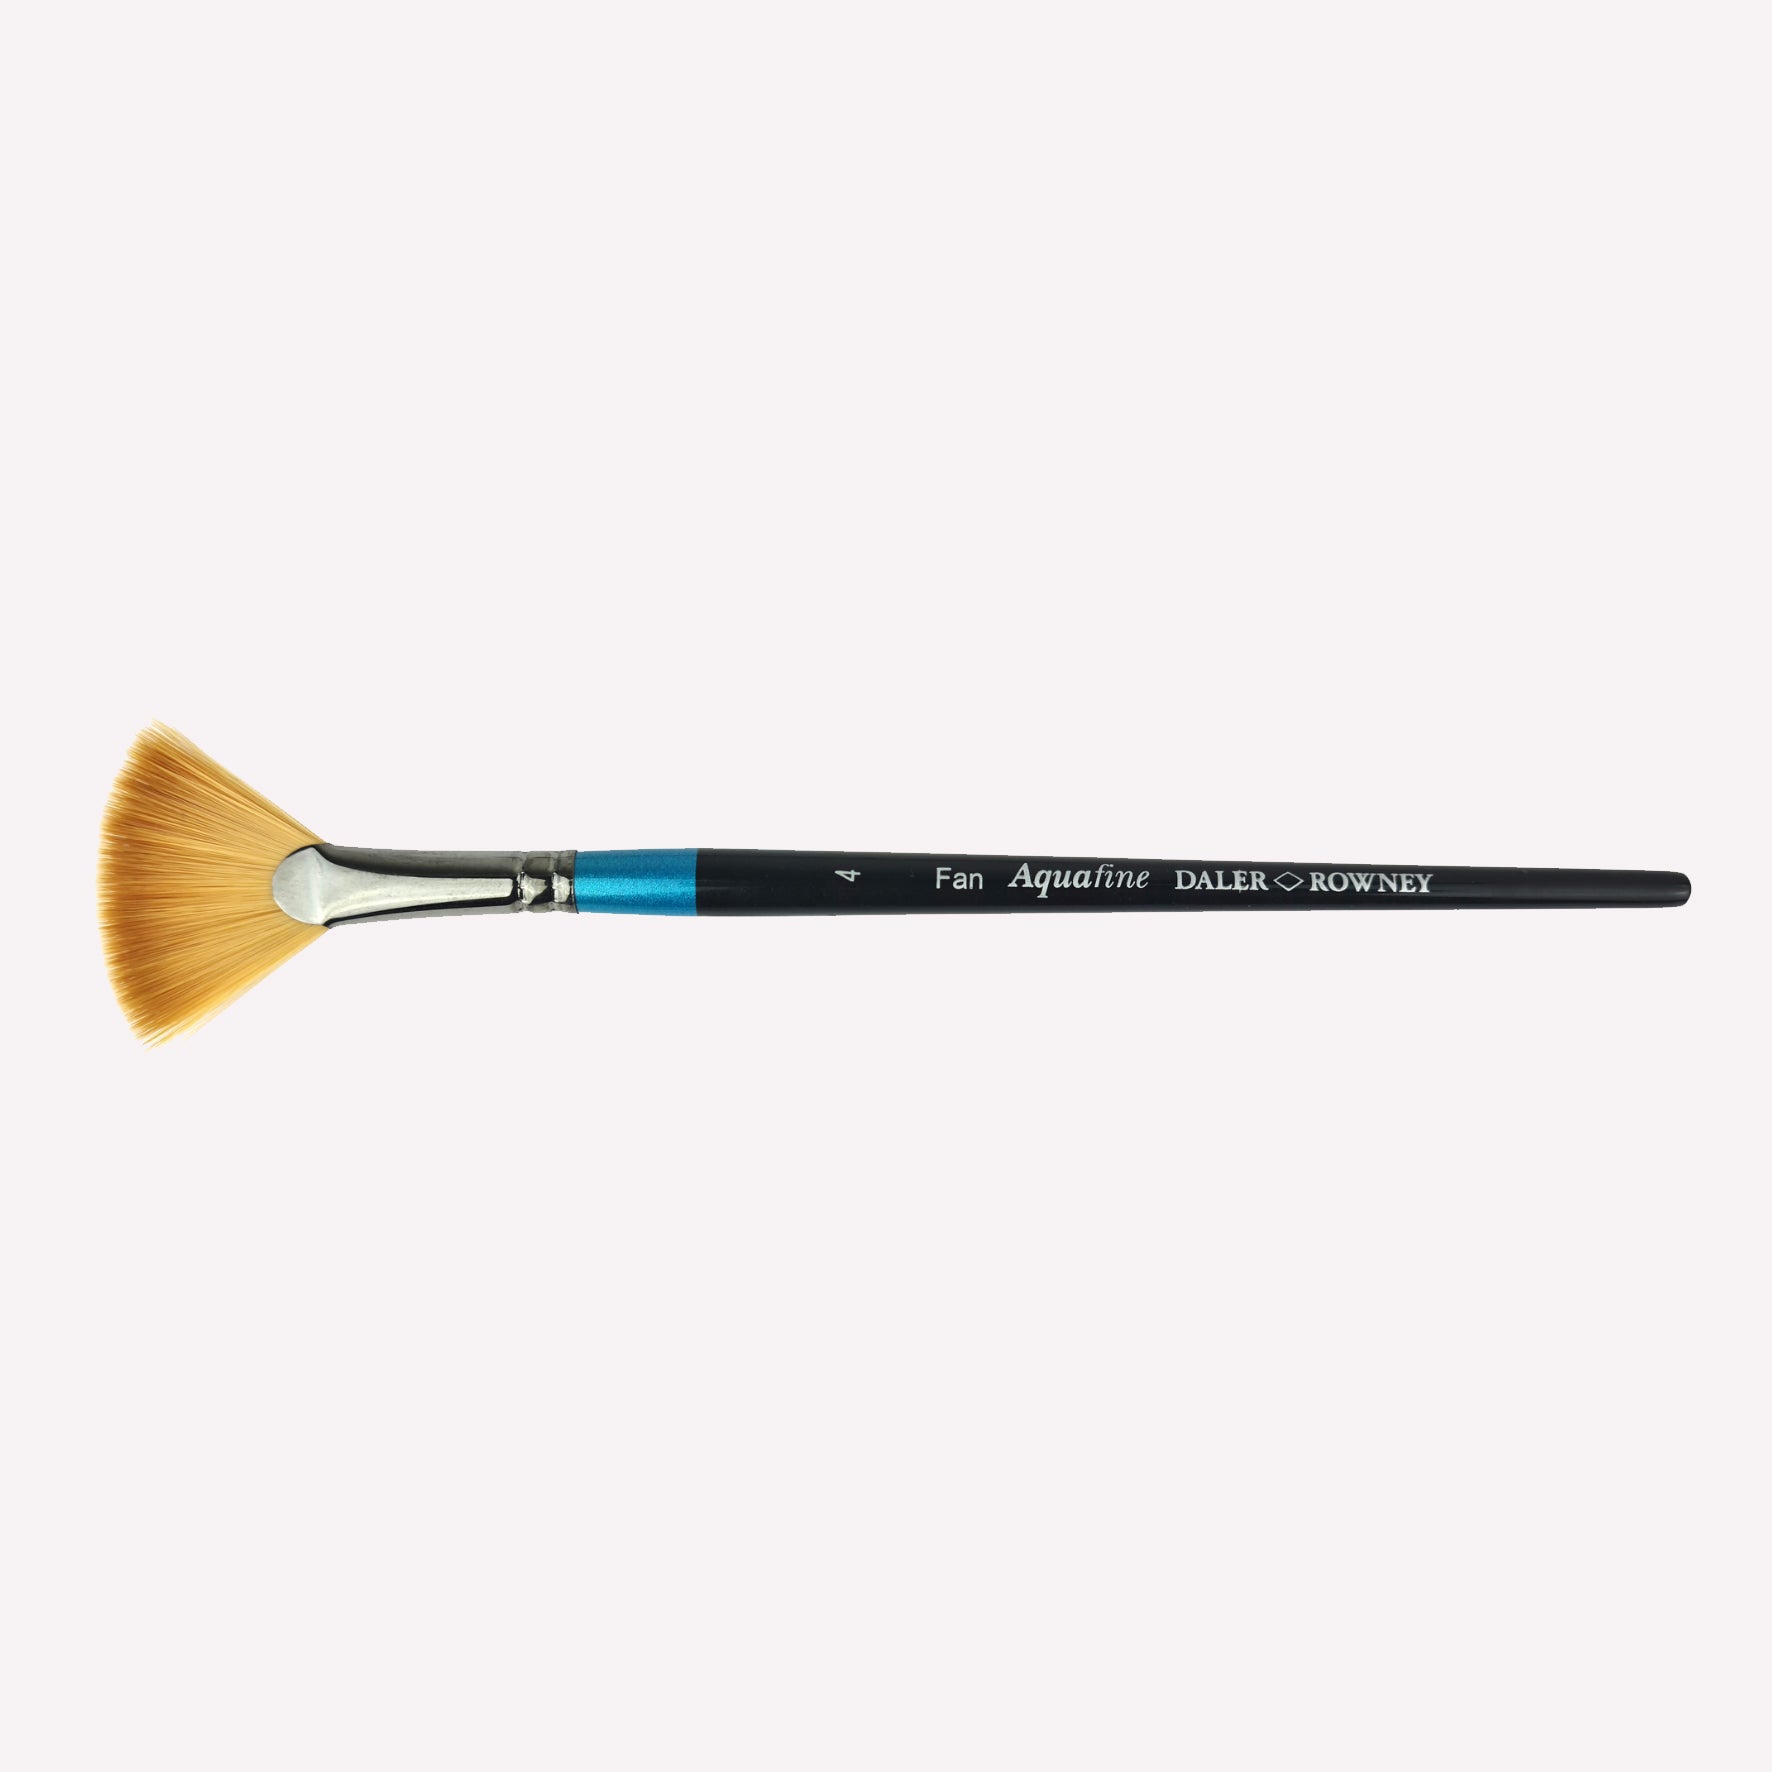 Daler Rowney Aquafine Fan Blender Paintbrush in size 4. These brushes feature a fan shaped arrangement of filaments, perfect for blending, softening edges and adding highlights or subtle textures. Brushes have a classy black handle with blue detailing and a silver ferrule.